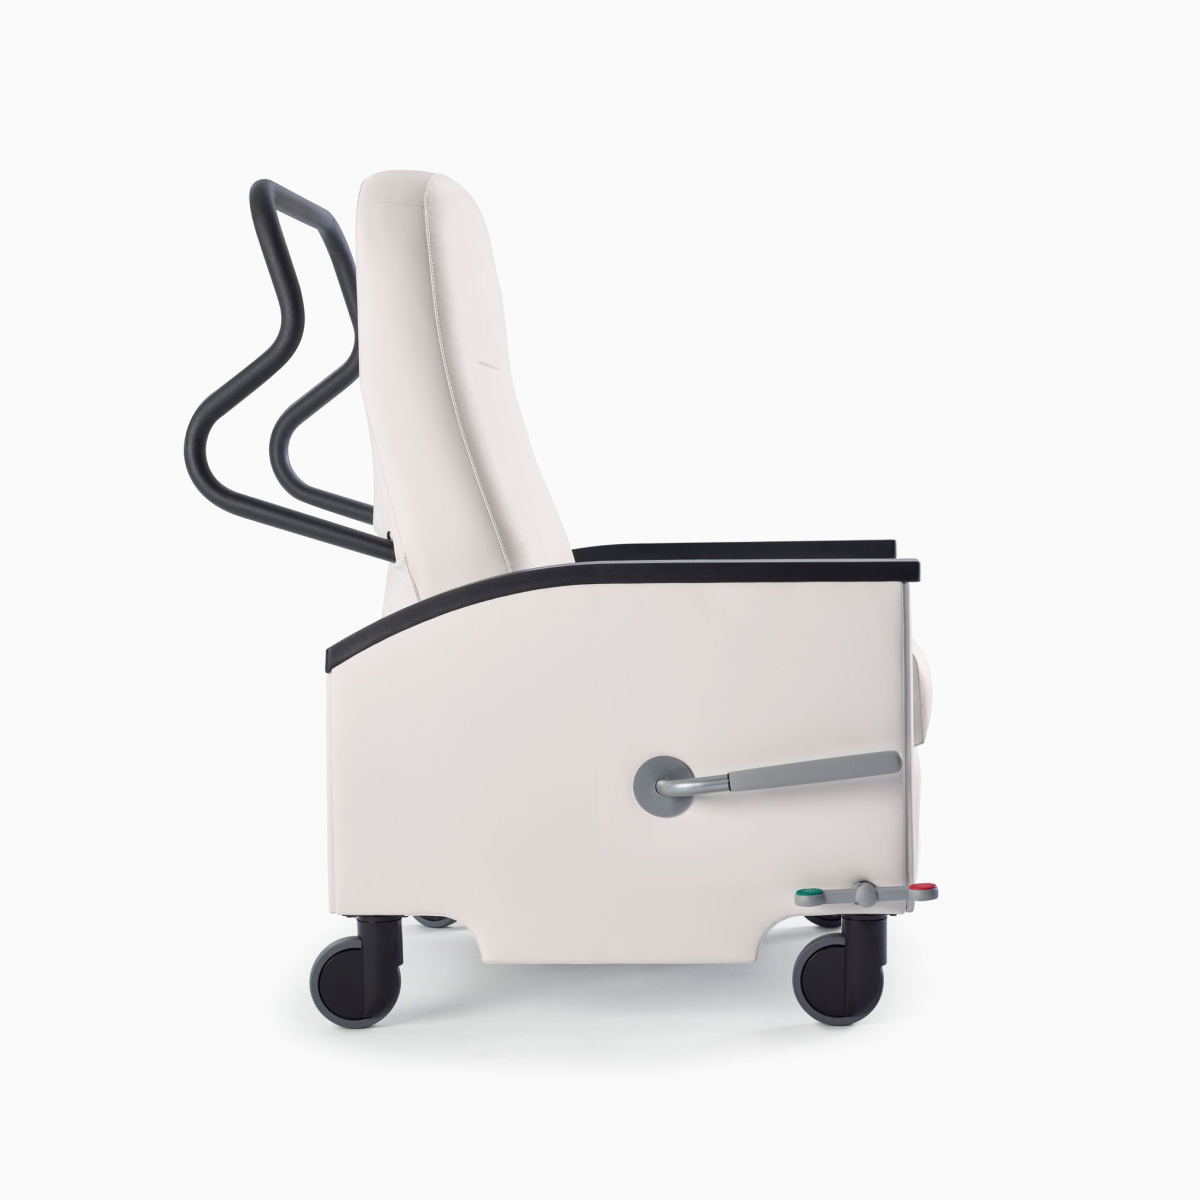 Profile view of Nemschoff Pristo Recliner to show the back edge that prevents wall damage.